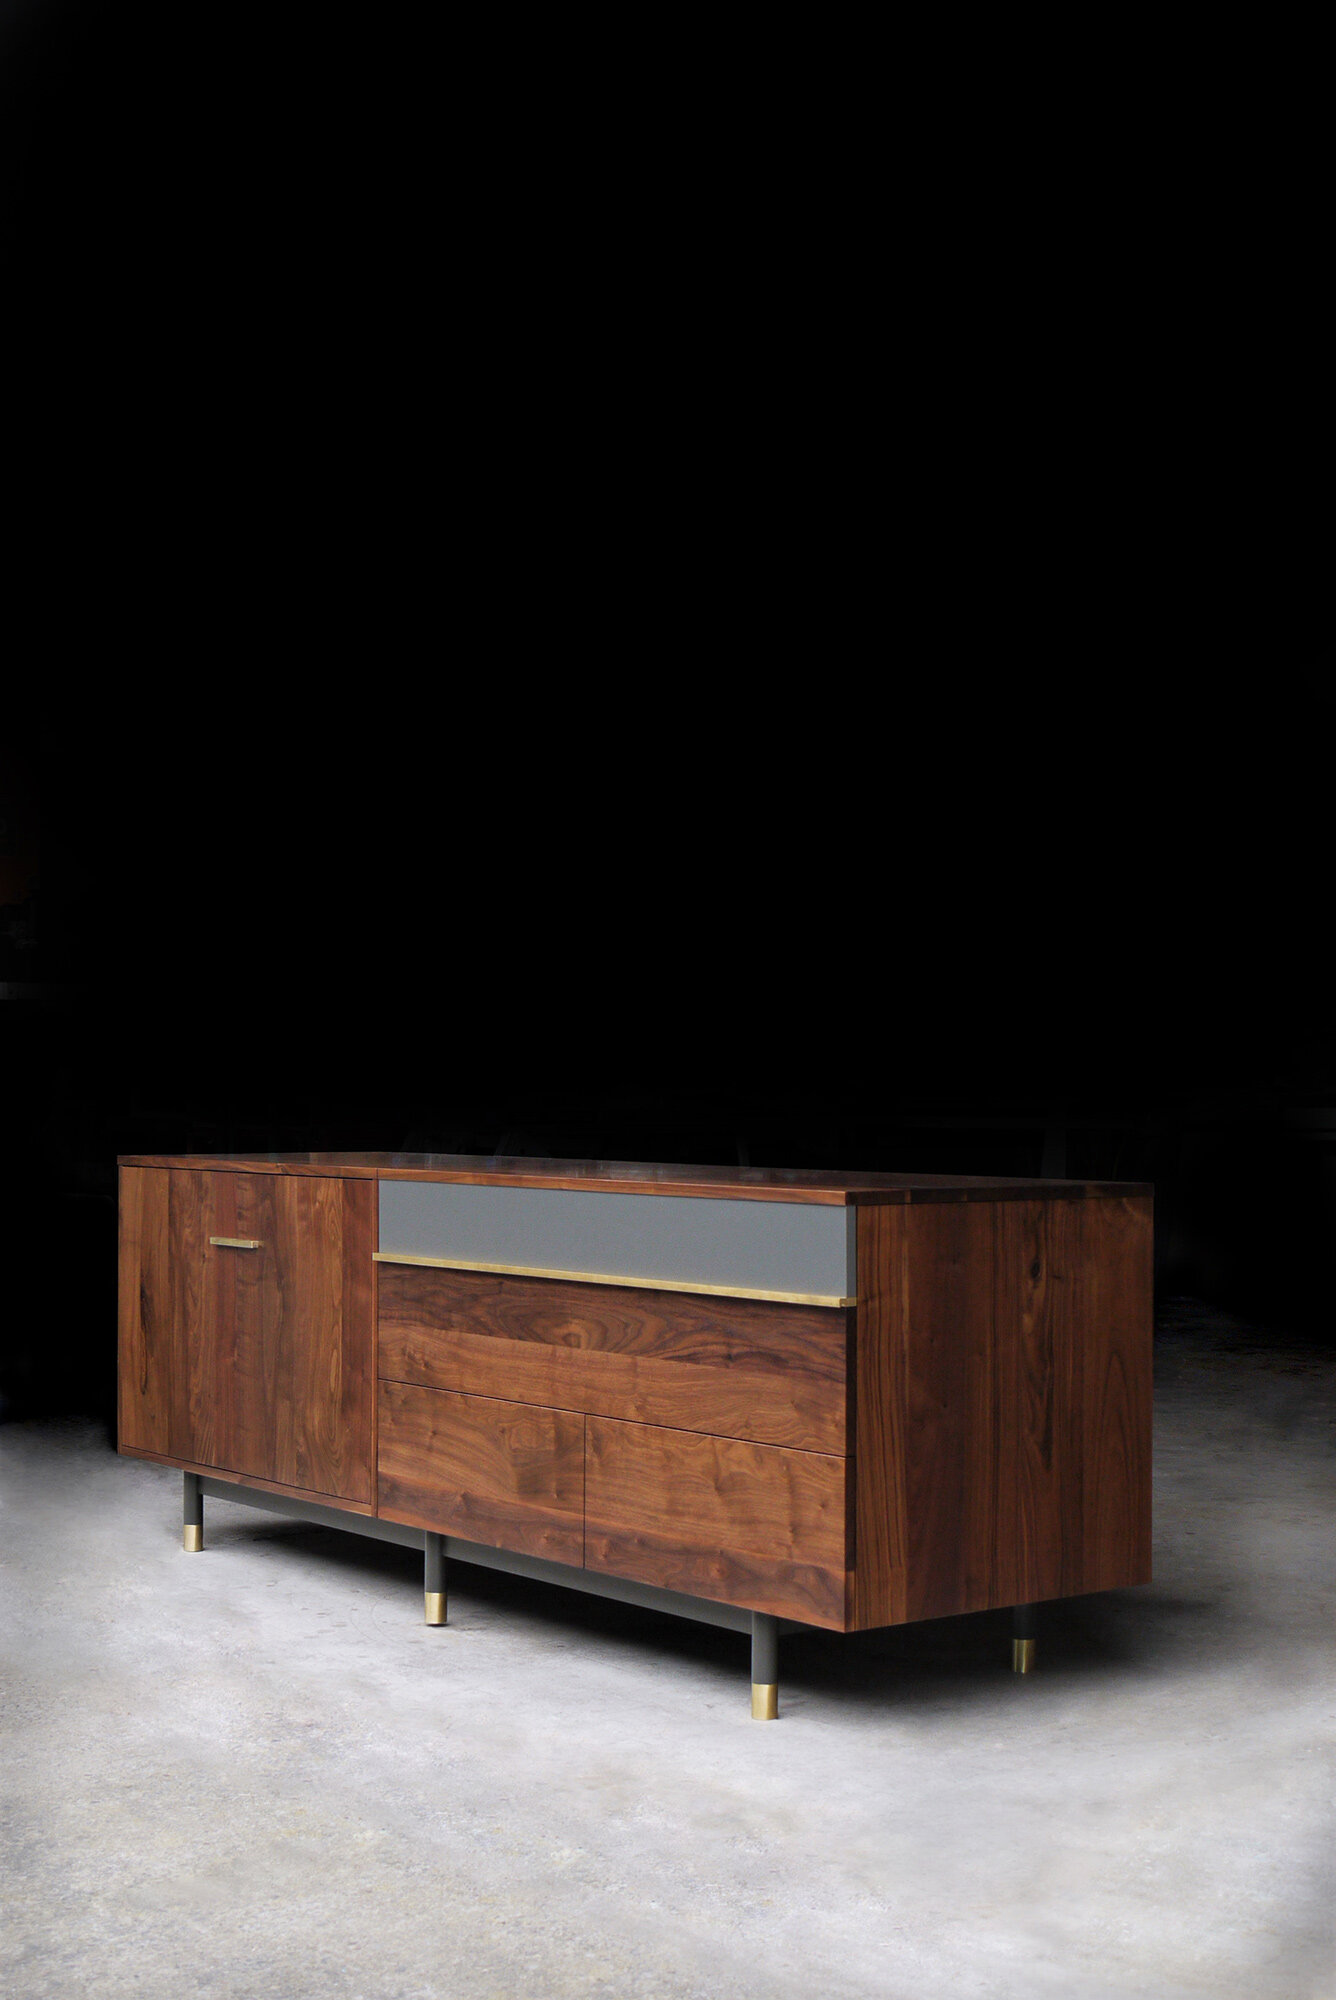 g. bunting av credenza with RS edits for web.jpg